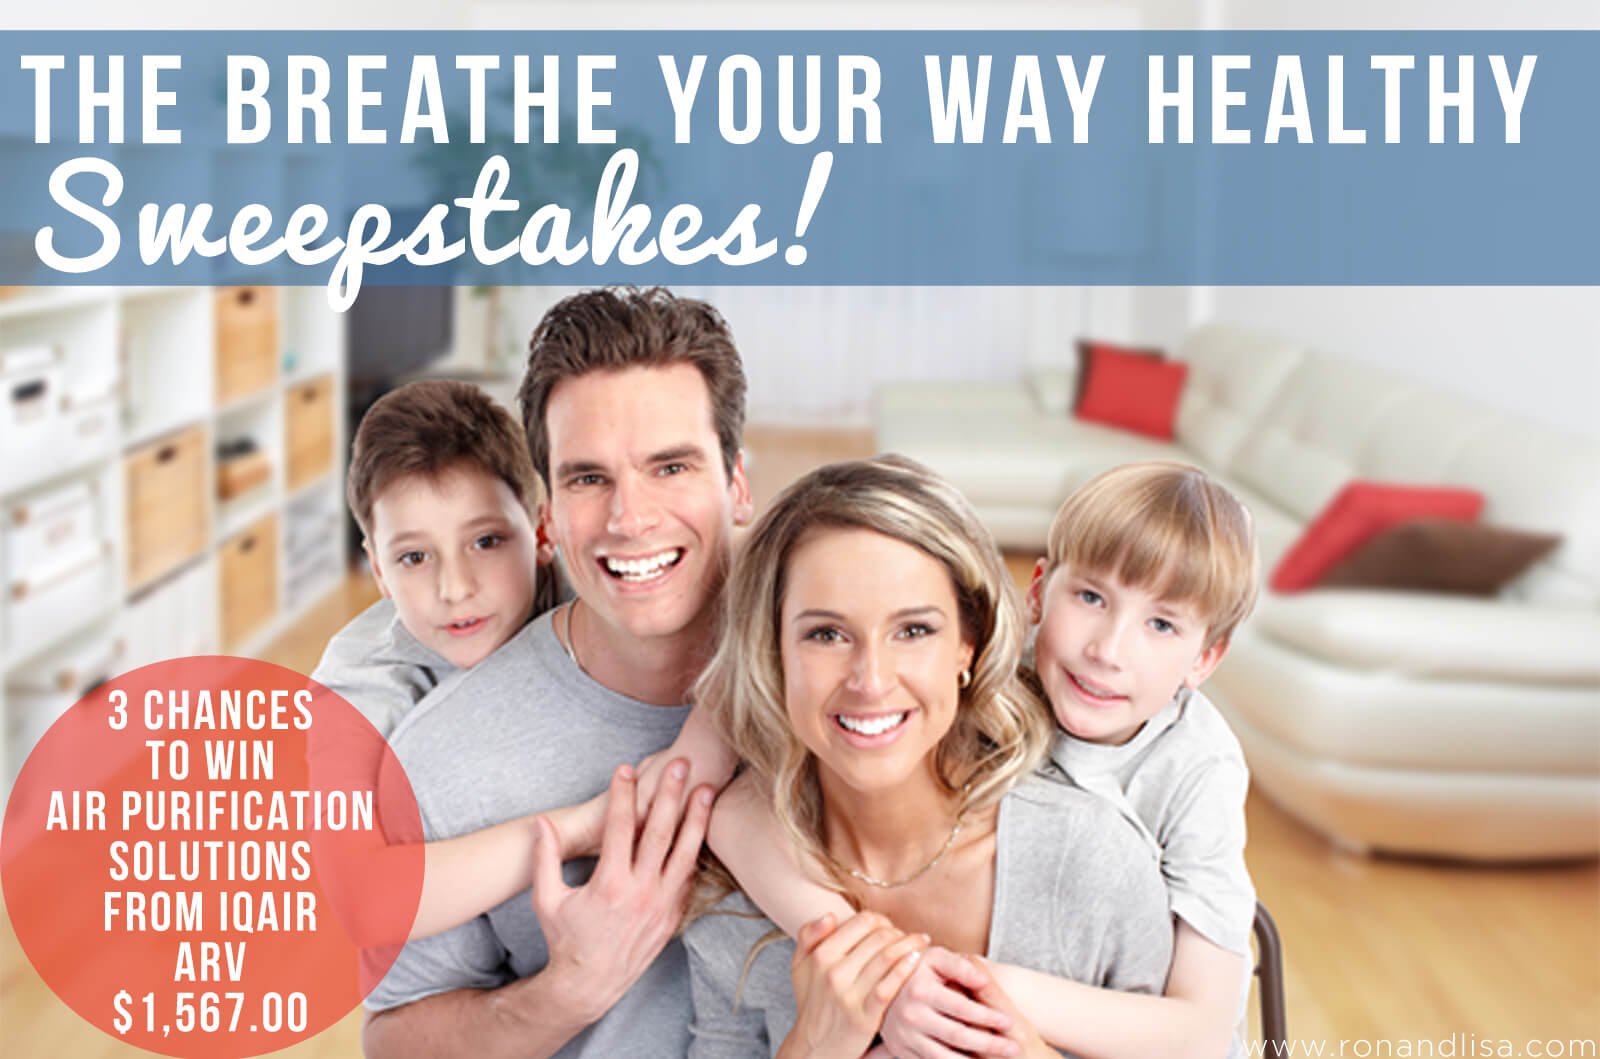 The Breathe Your Way Healthy Sweepstakes!